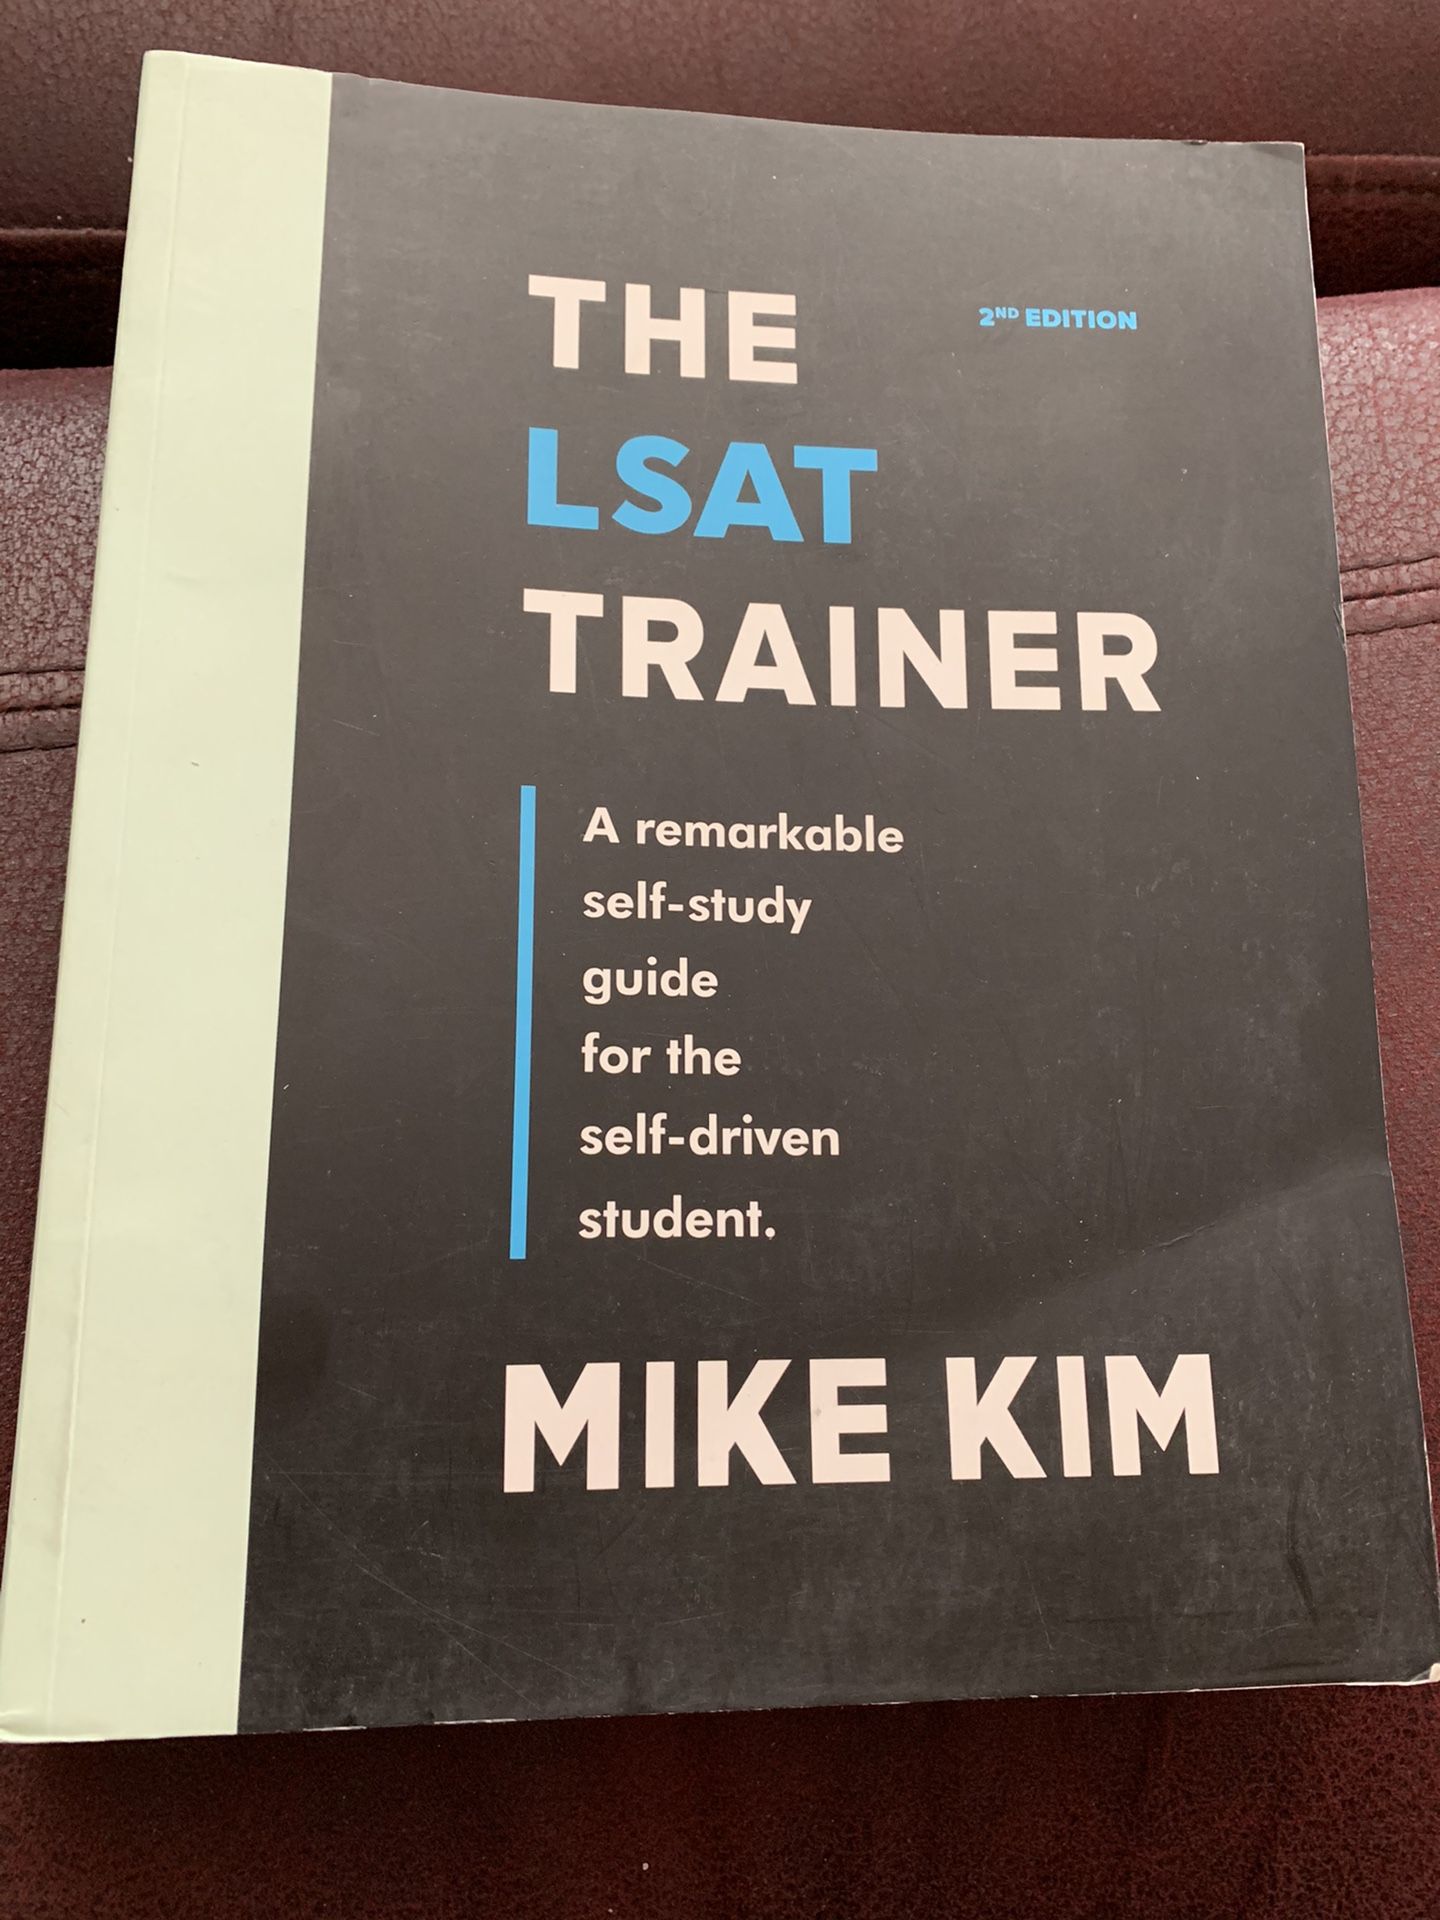 The LSAT Trainer: A Remarkable Self-Study Guide For The Self-Driven Student 2nd Edition ISBN-13: 978-0989081535, ISBN-10: 0989081532